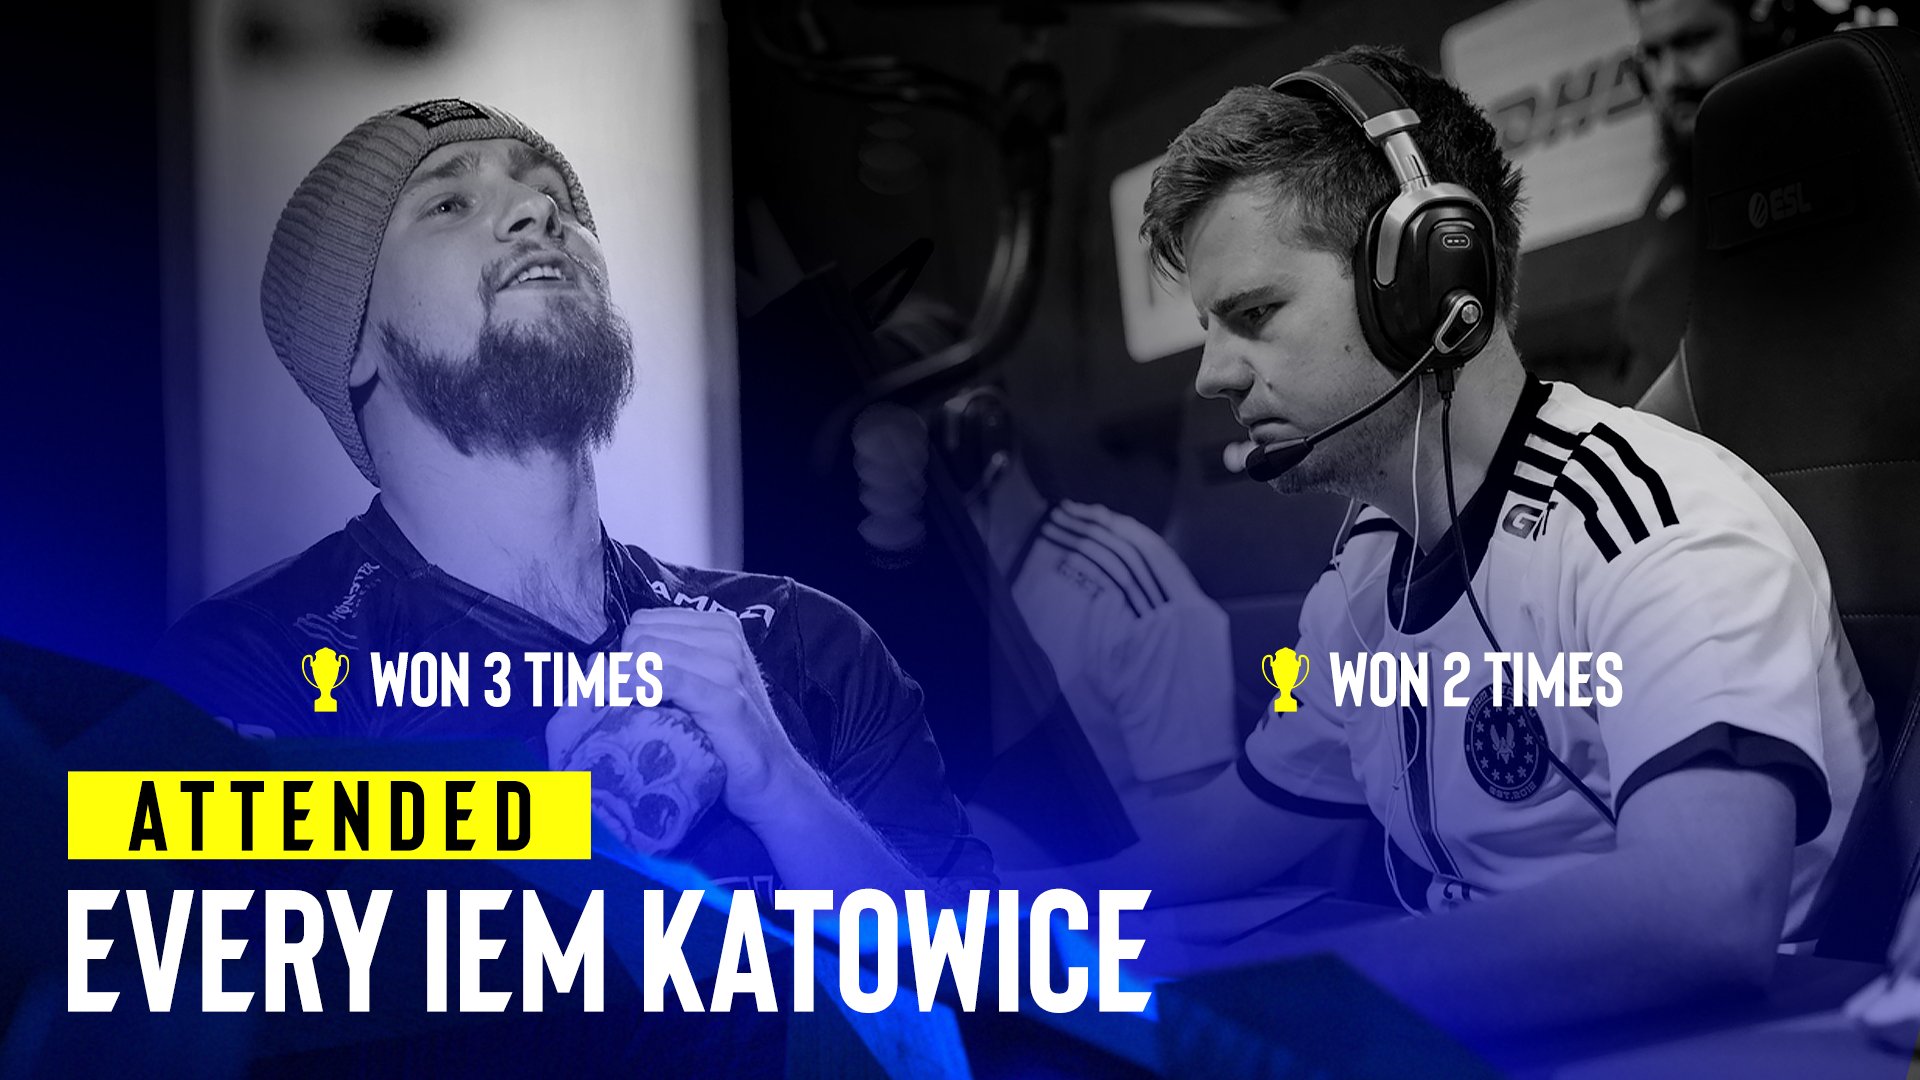 Two players who have attended every IEM Katowice